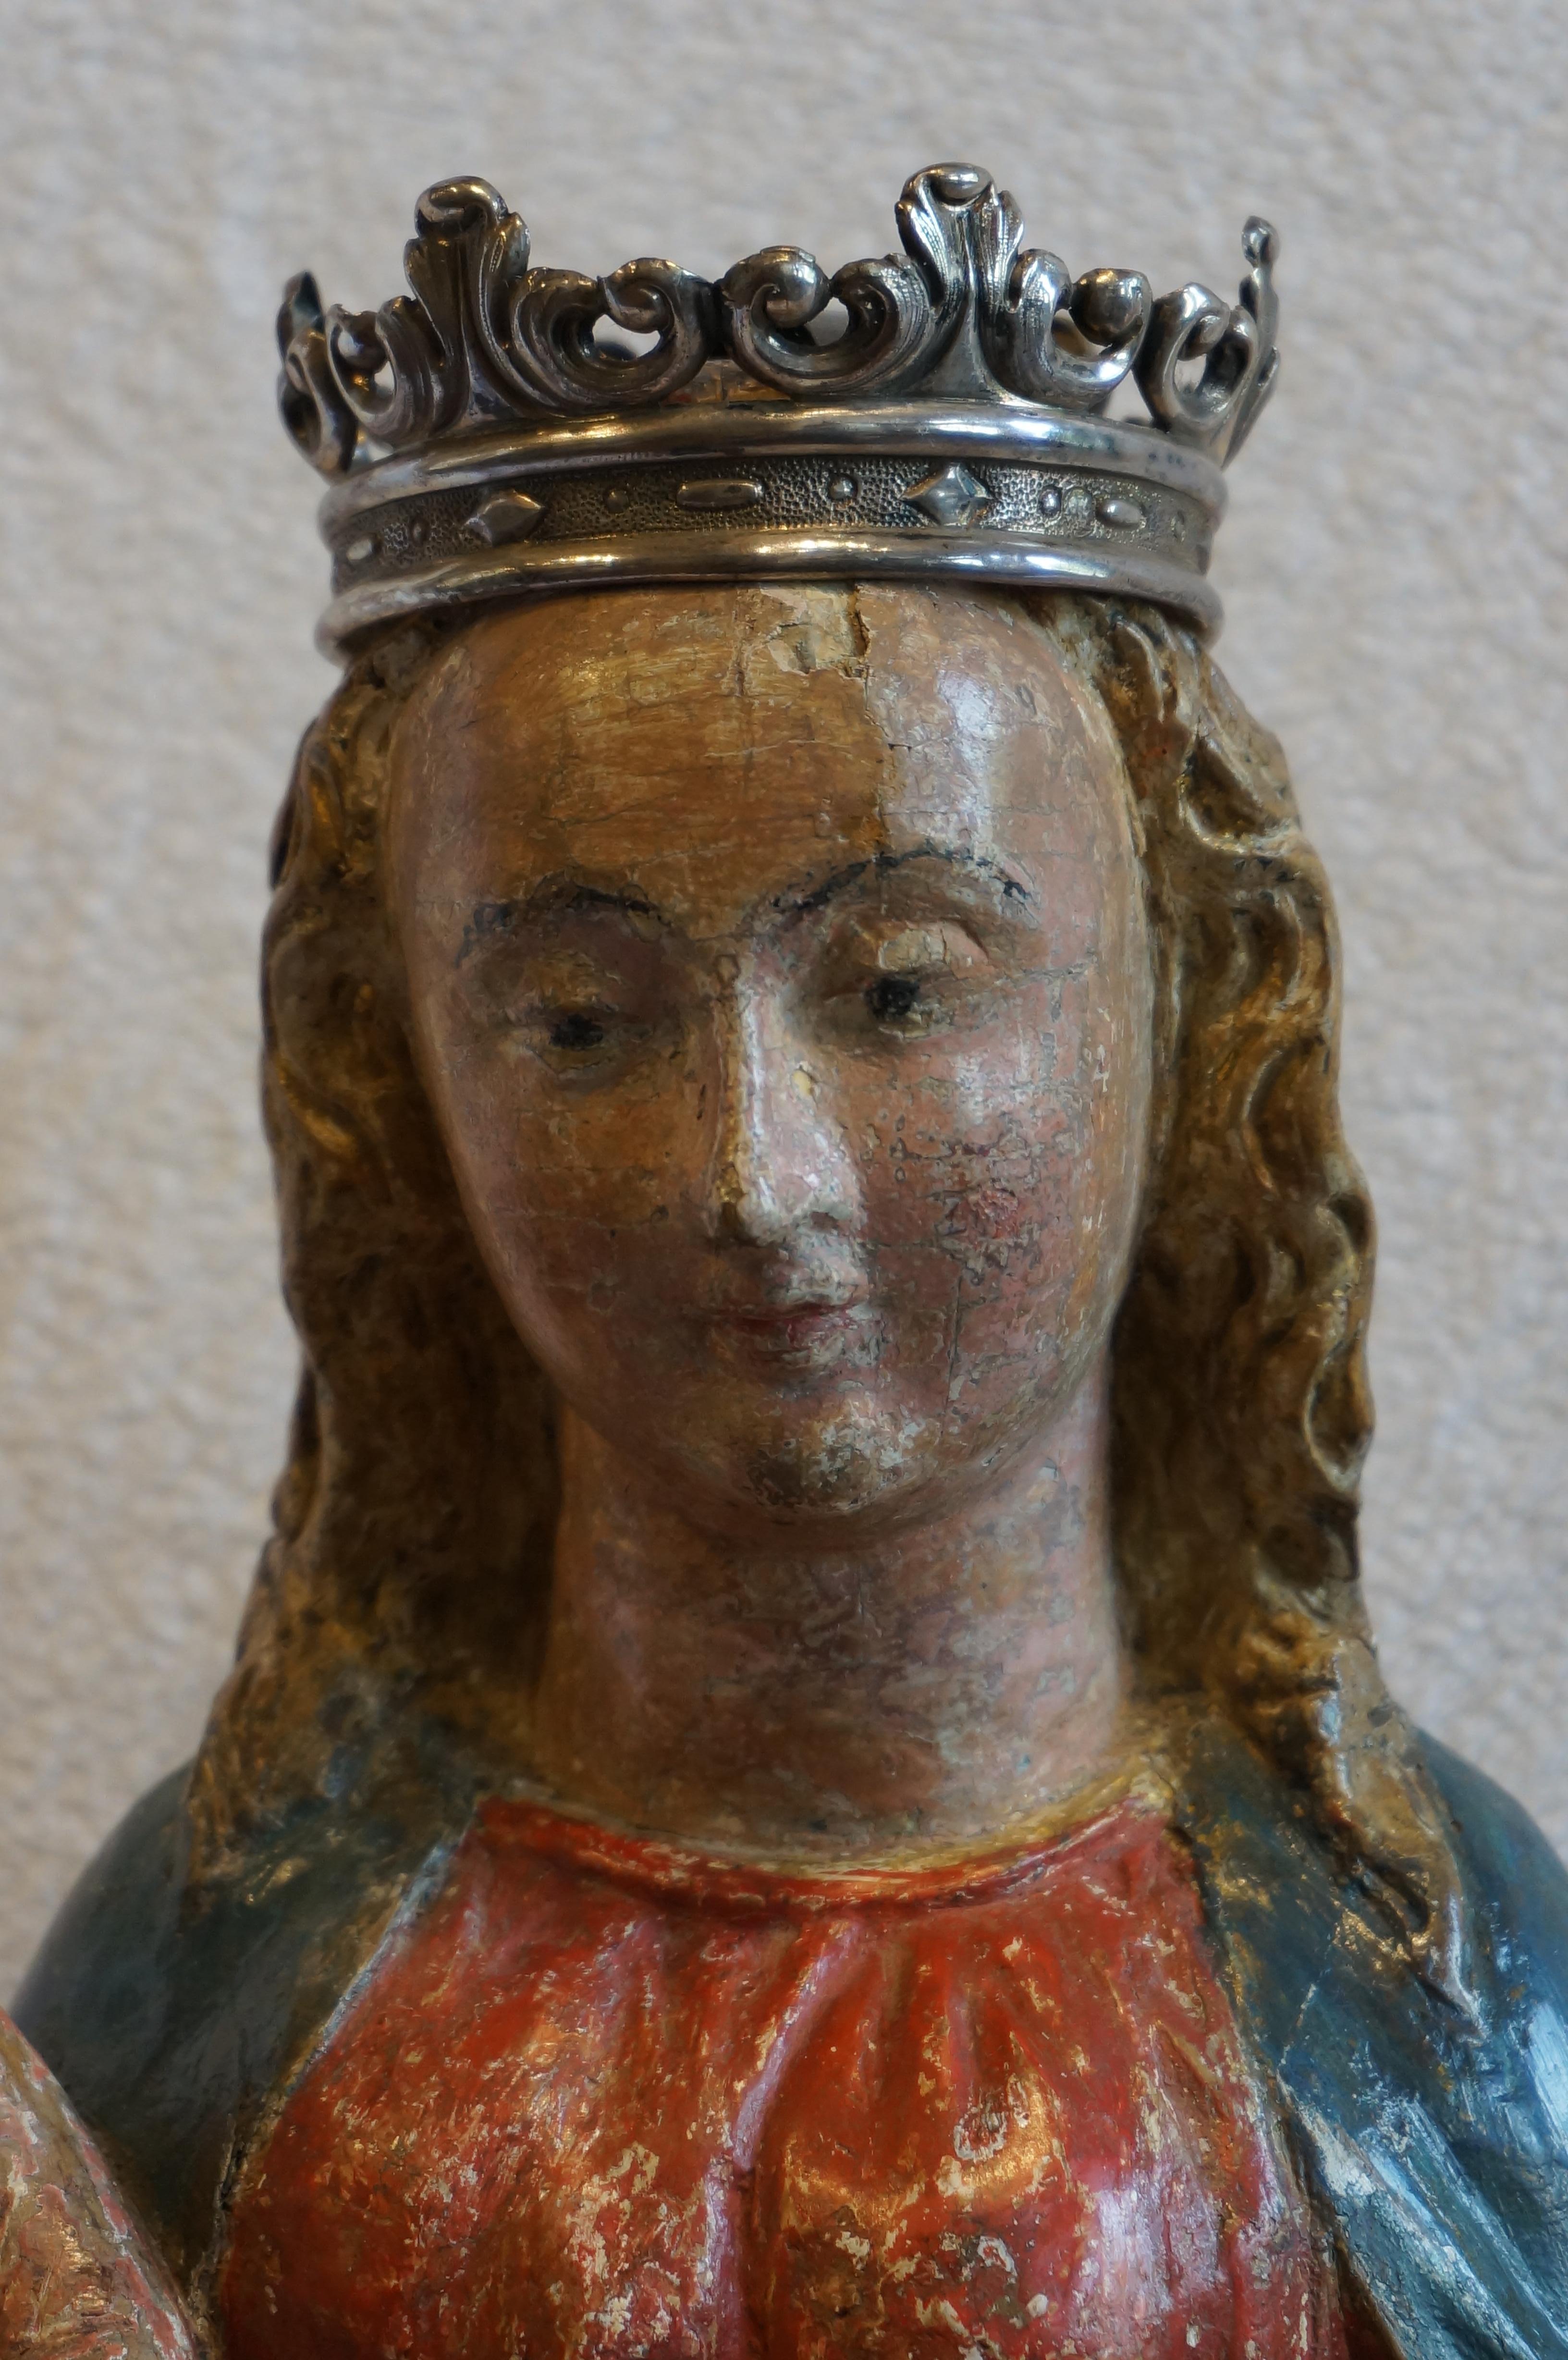 Belgian Antique Sculpture of Mary with the Child Jesus, Belgium, early 17th century For Sale